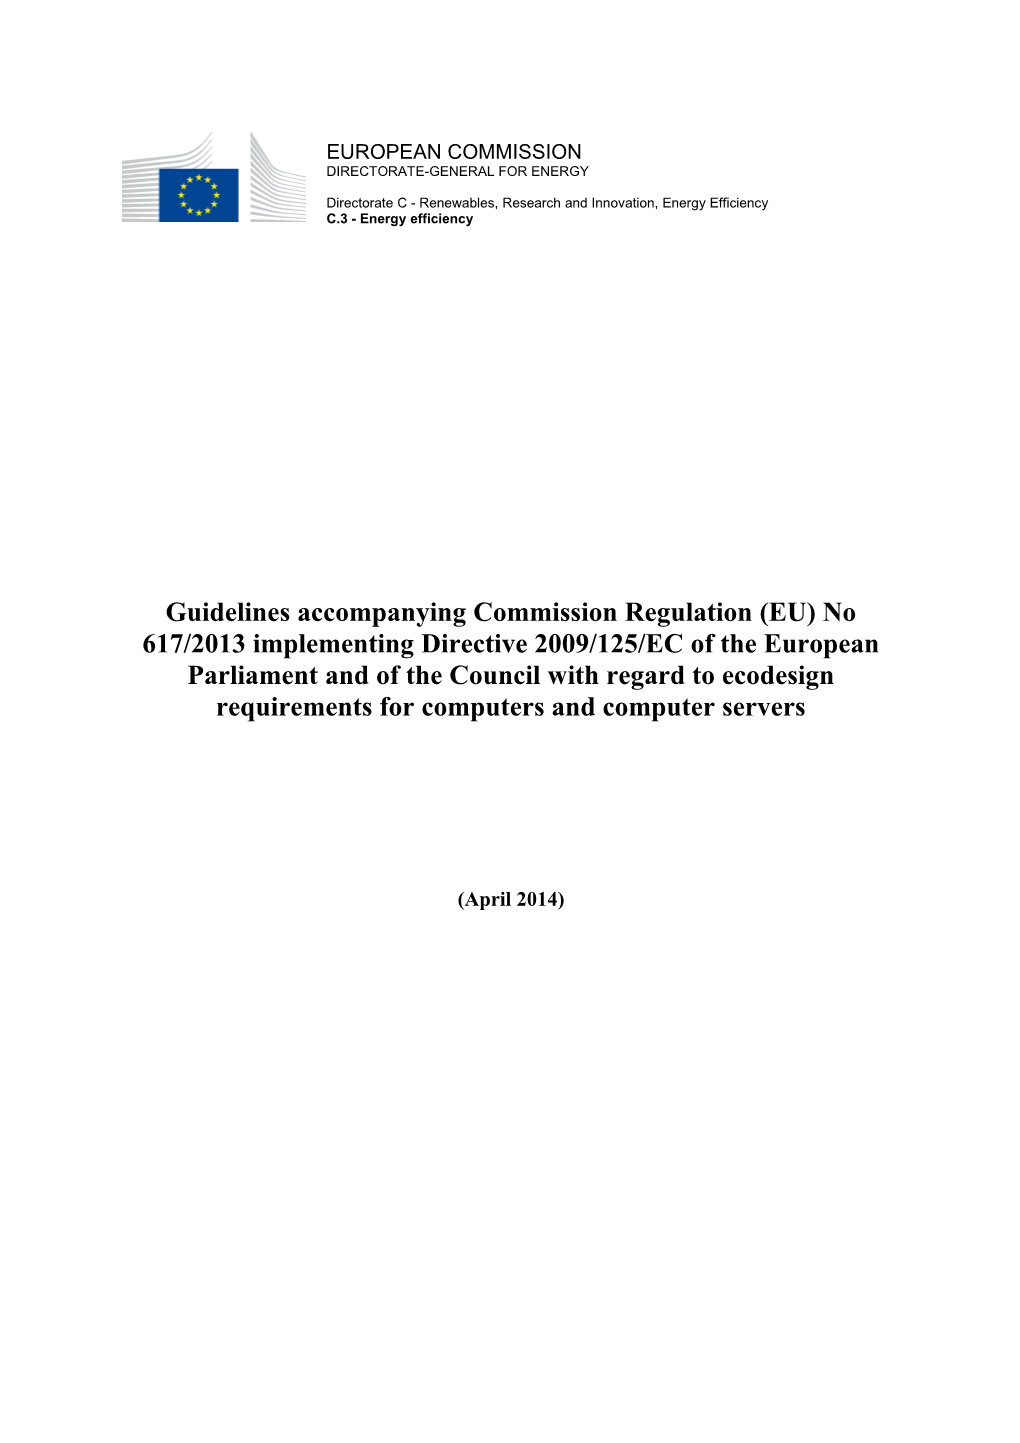 Guidelines Accompanying Commission Regulation (EU) No 617/2013Implementing Directive